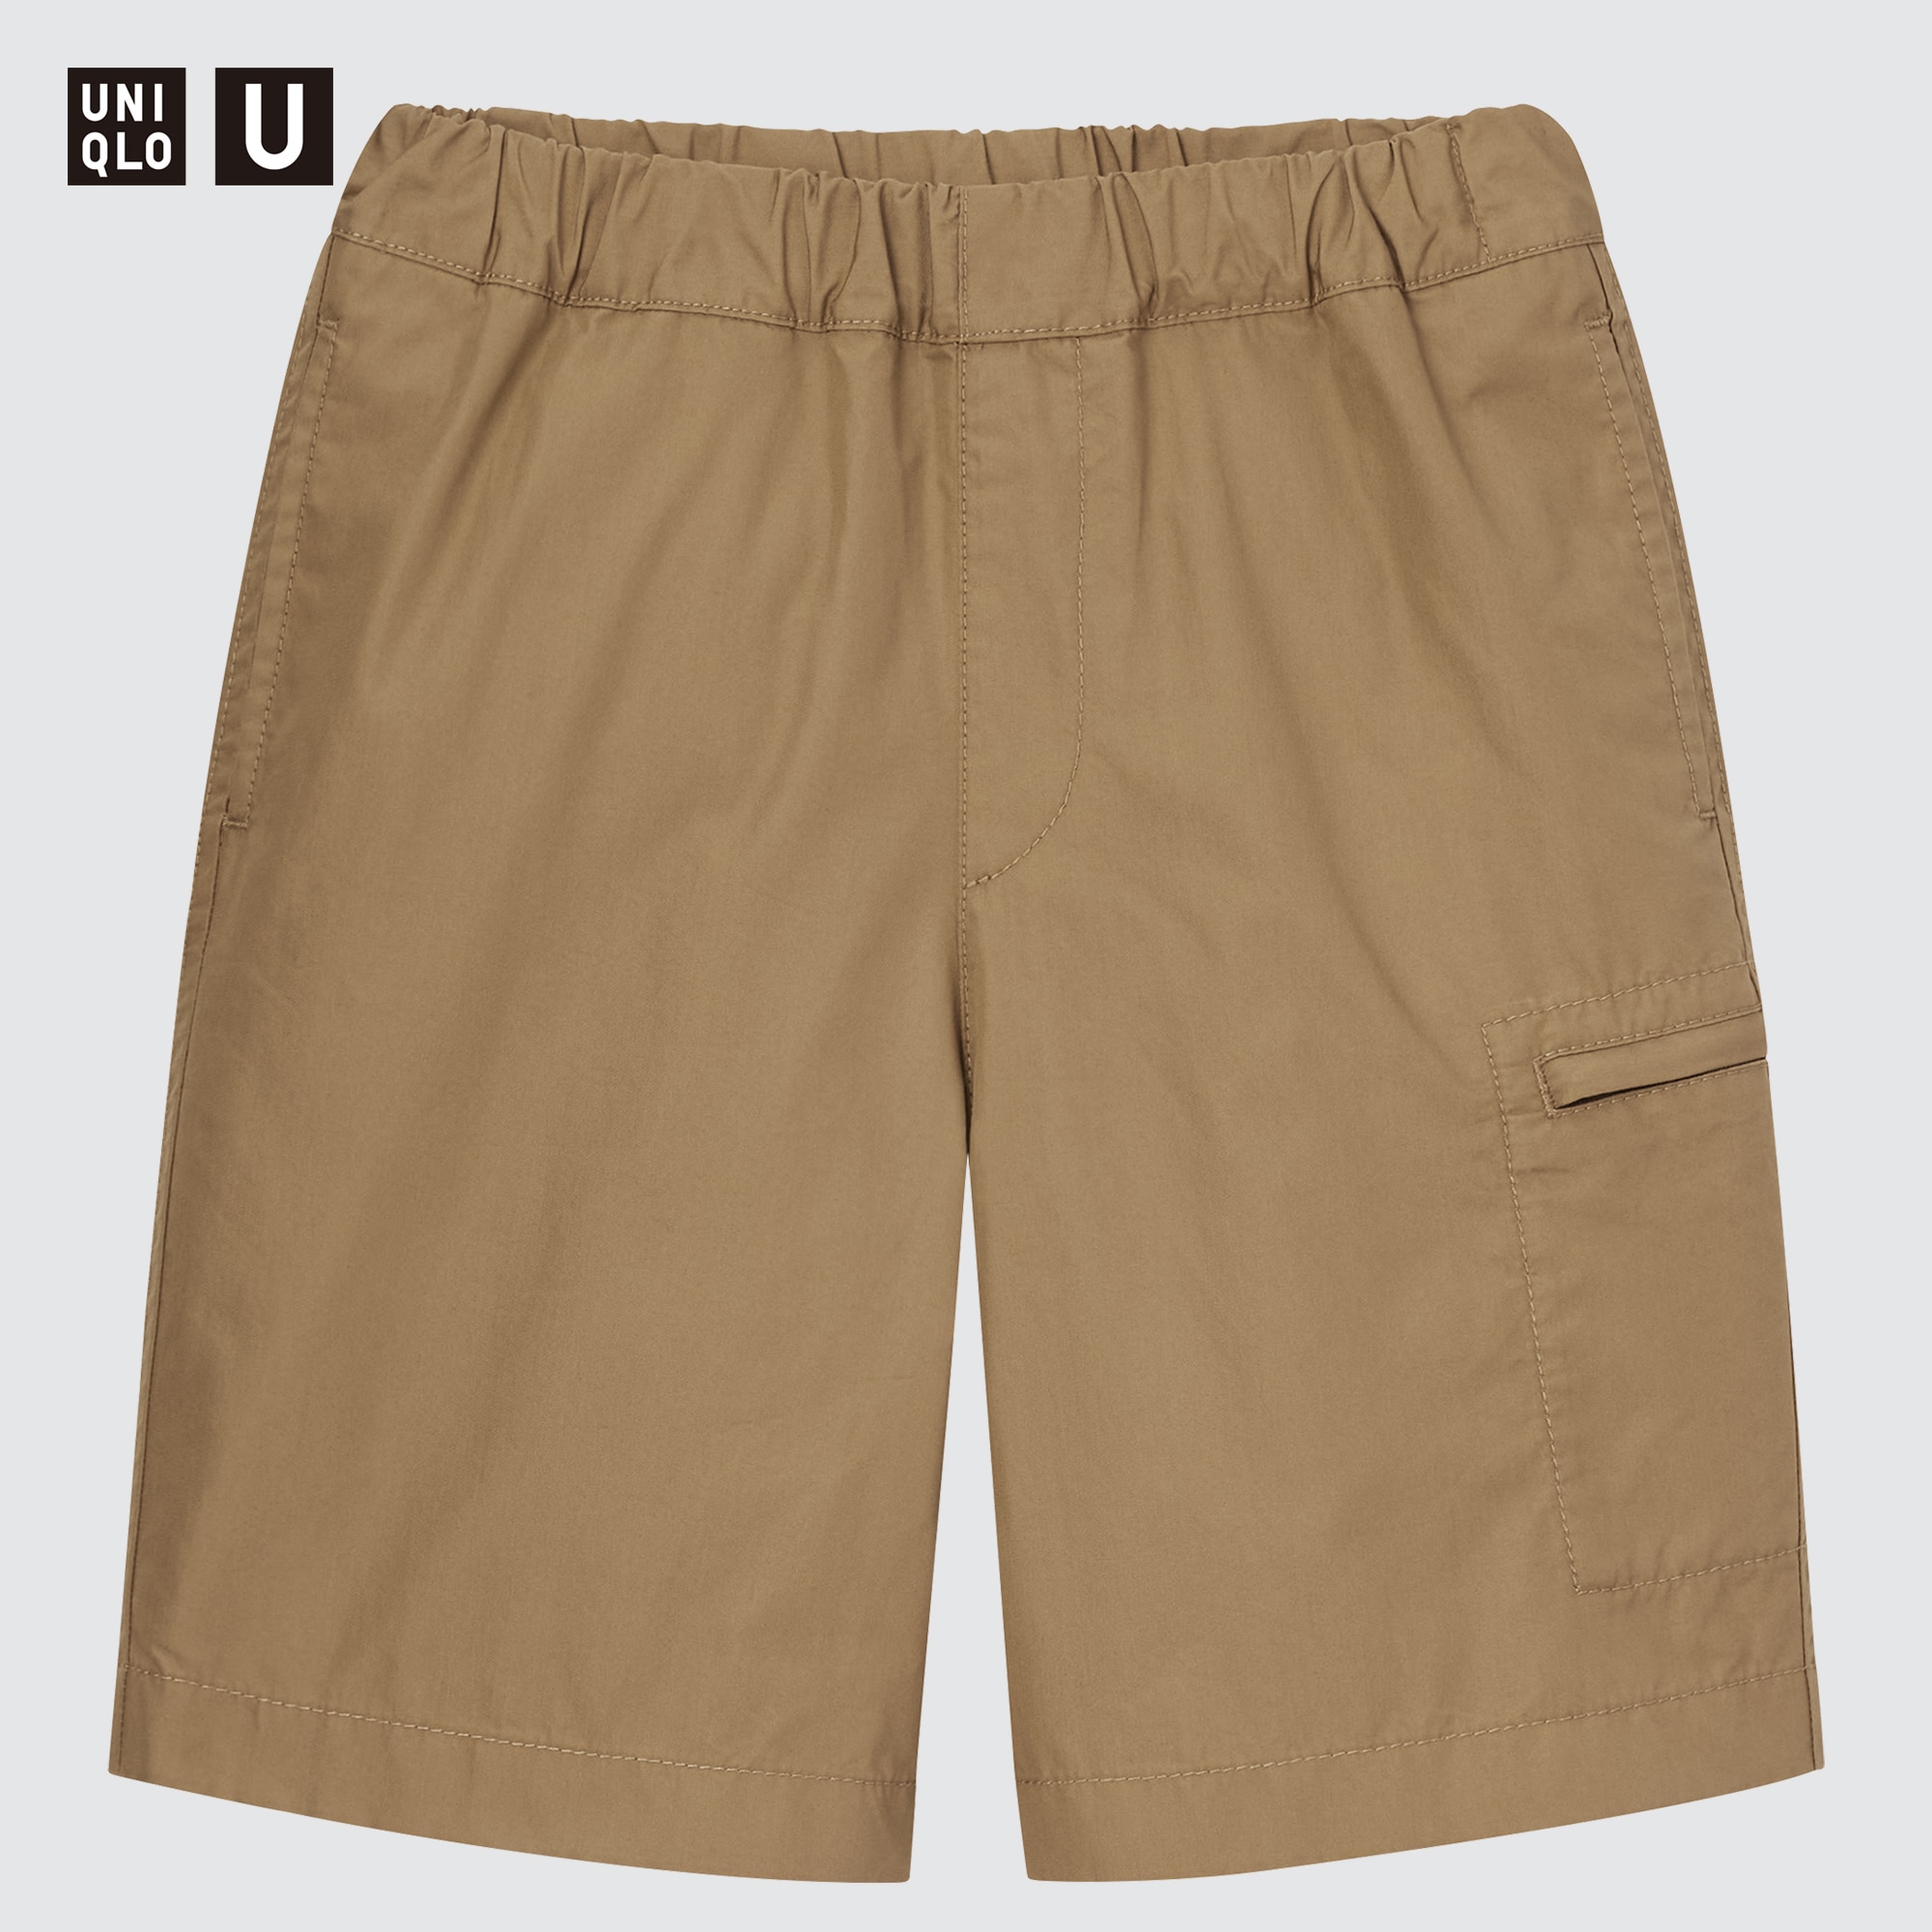 MEN'S AIRSENSE RELAXED SHORTS UNIQLO X THEORY (ULTRA LIGHT RELAXED SHORTS)